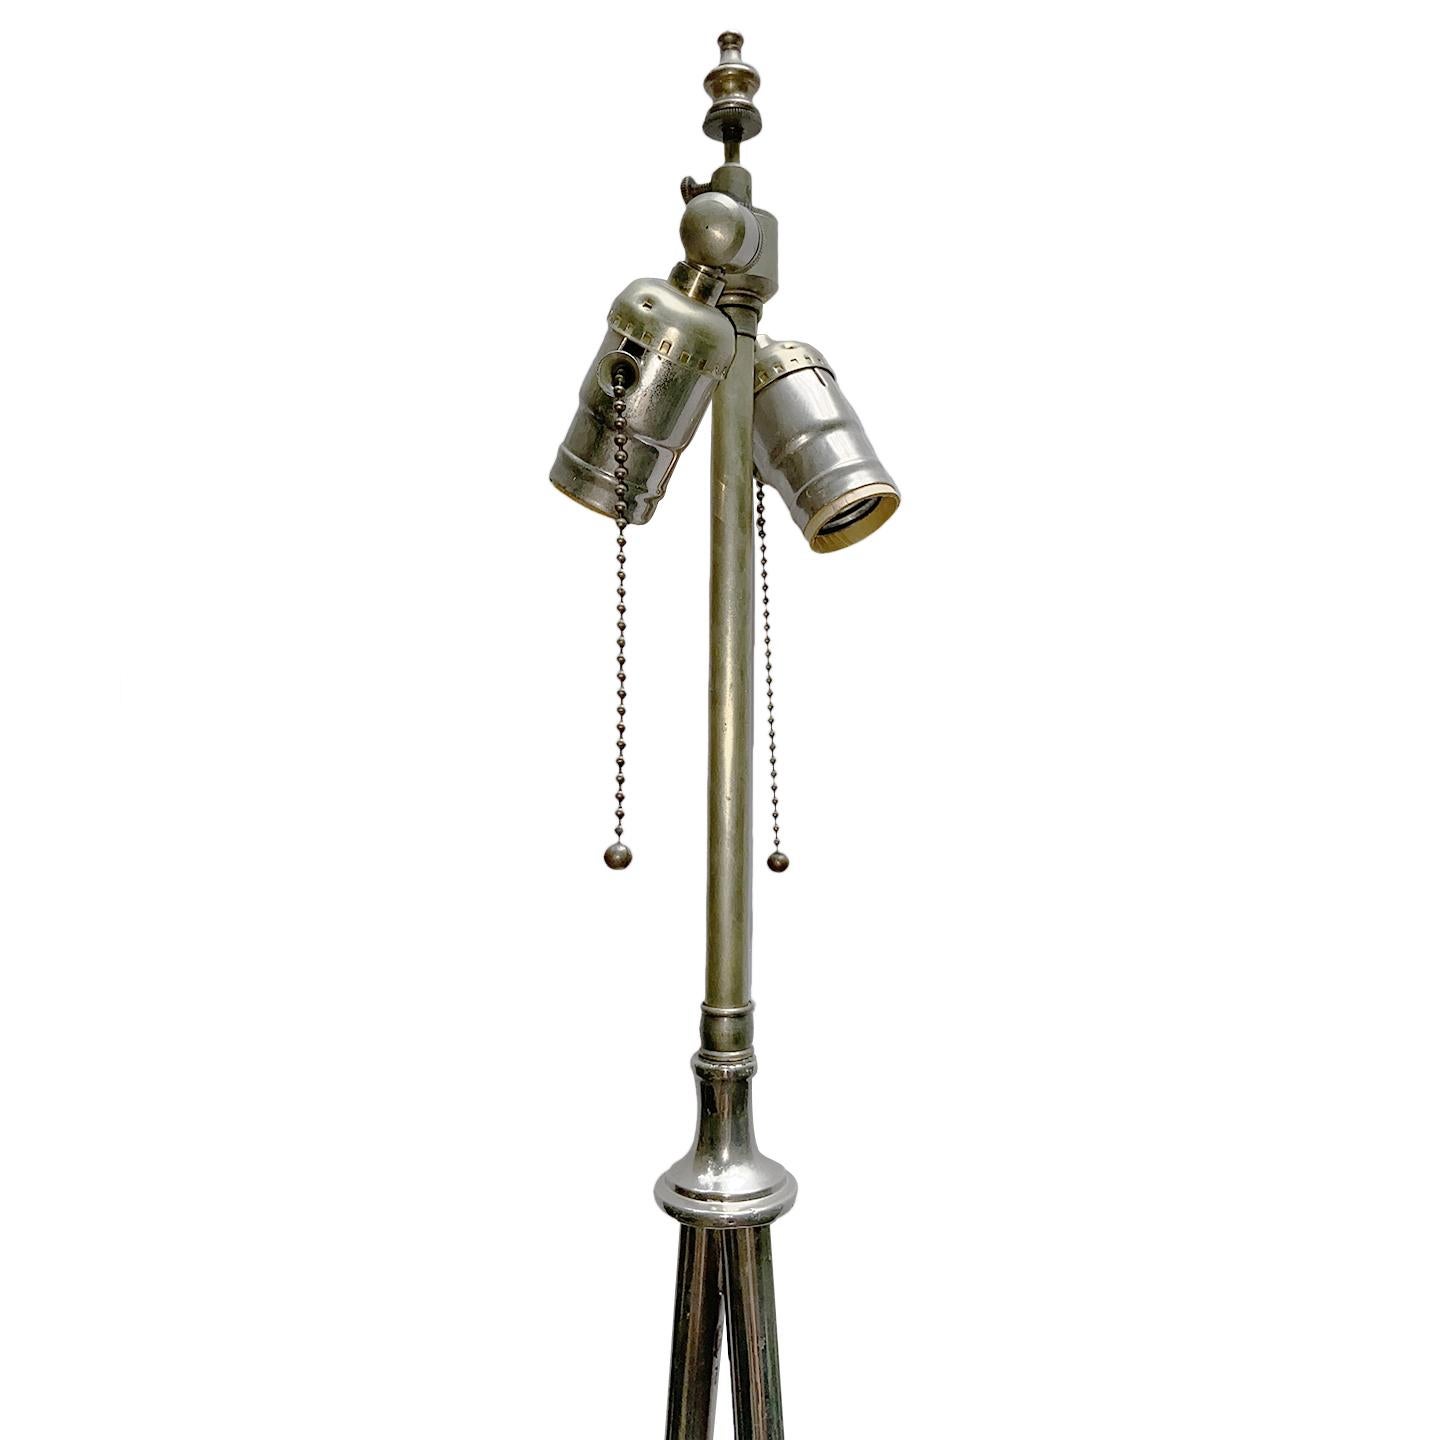 A single circa late 1940's moderne style nickel-plated Italian floor lamp.

Measurements:
Height of body: 50.5